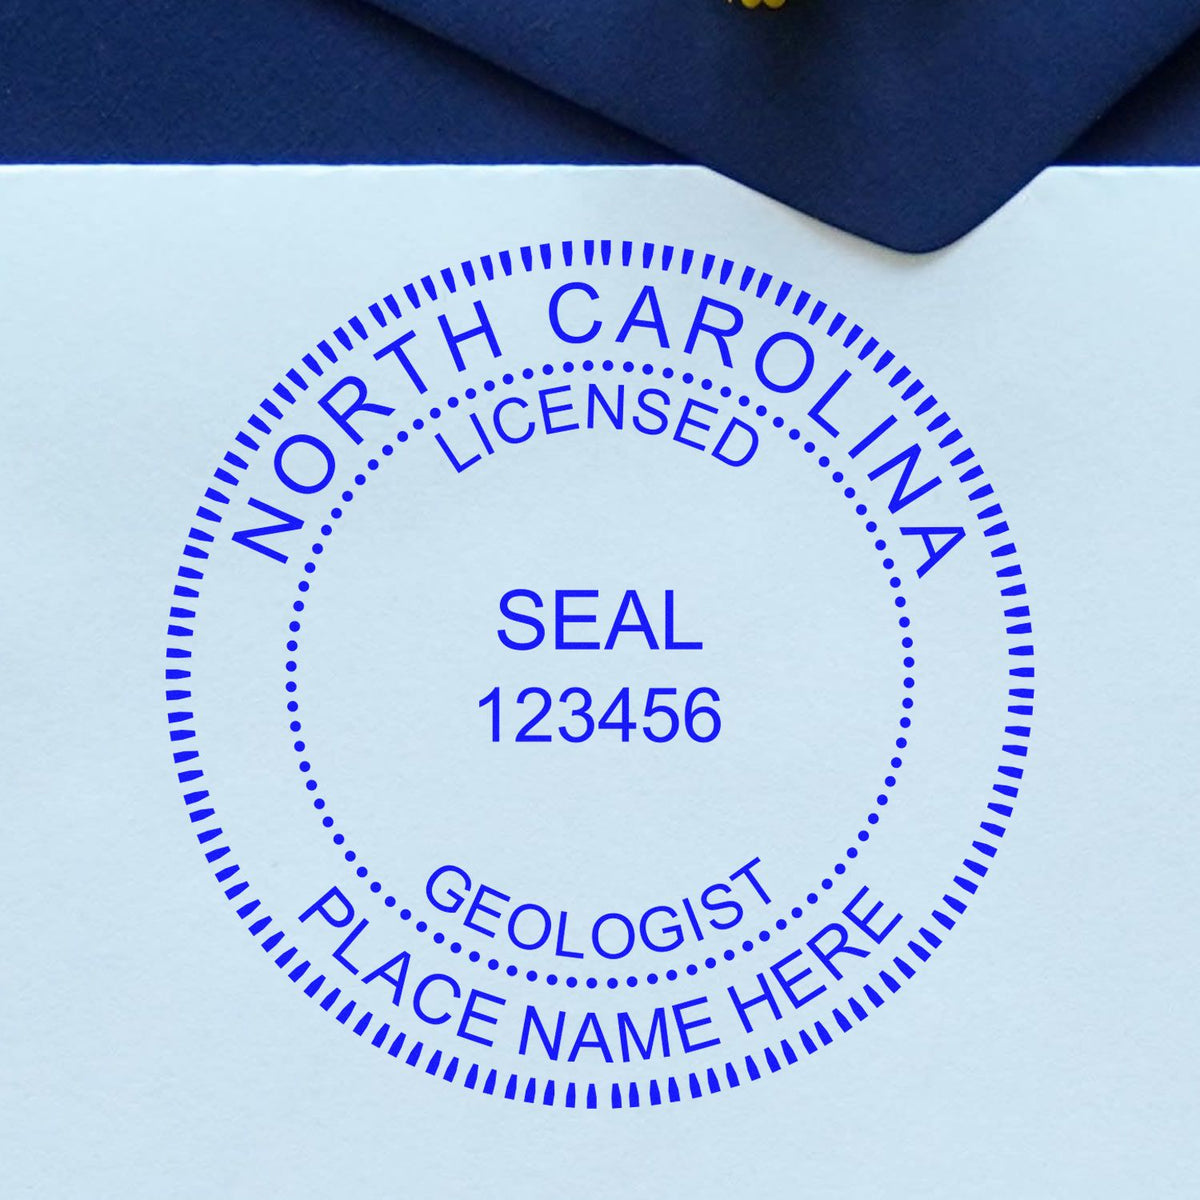 An alternative view of the Slim Pre-Inked North Carolina Professional Geologist Seal Stamp stamped on a sheet of paper showing the image in use